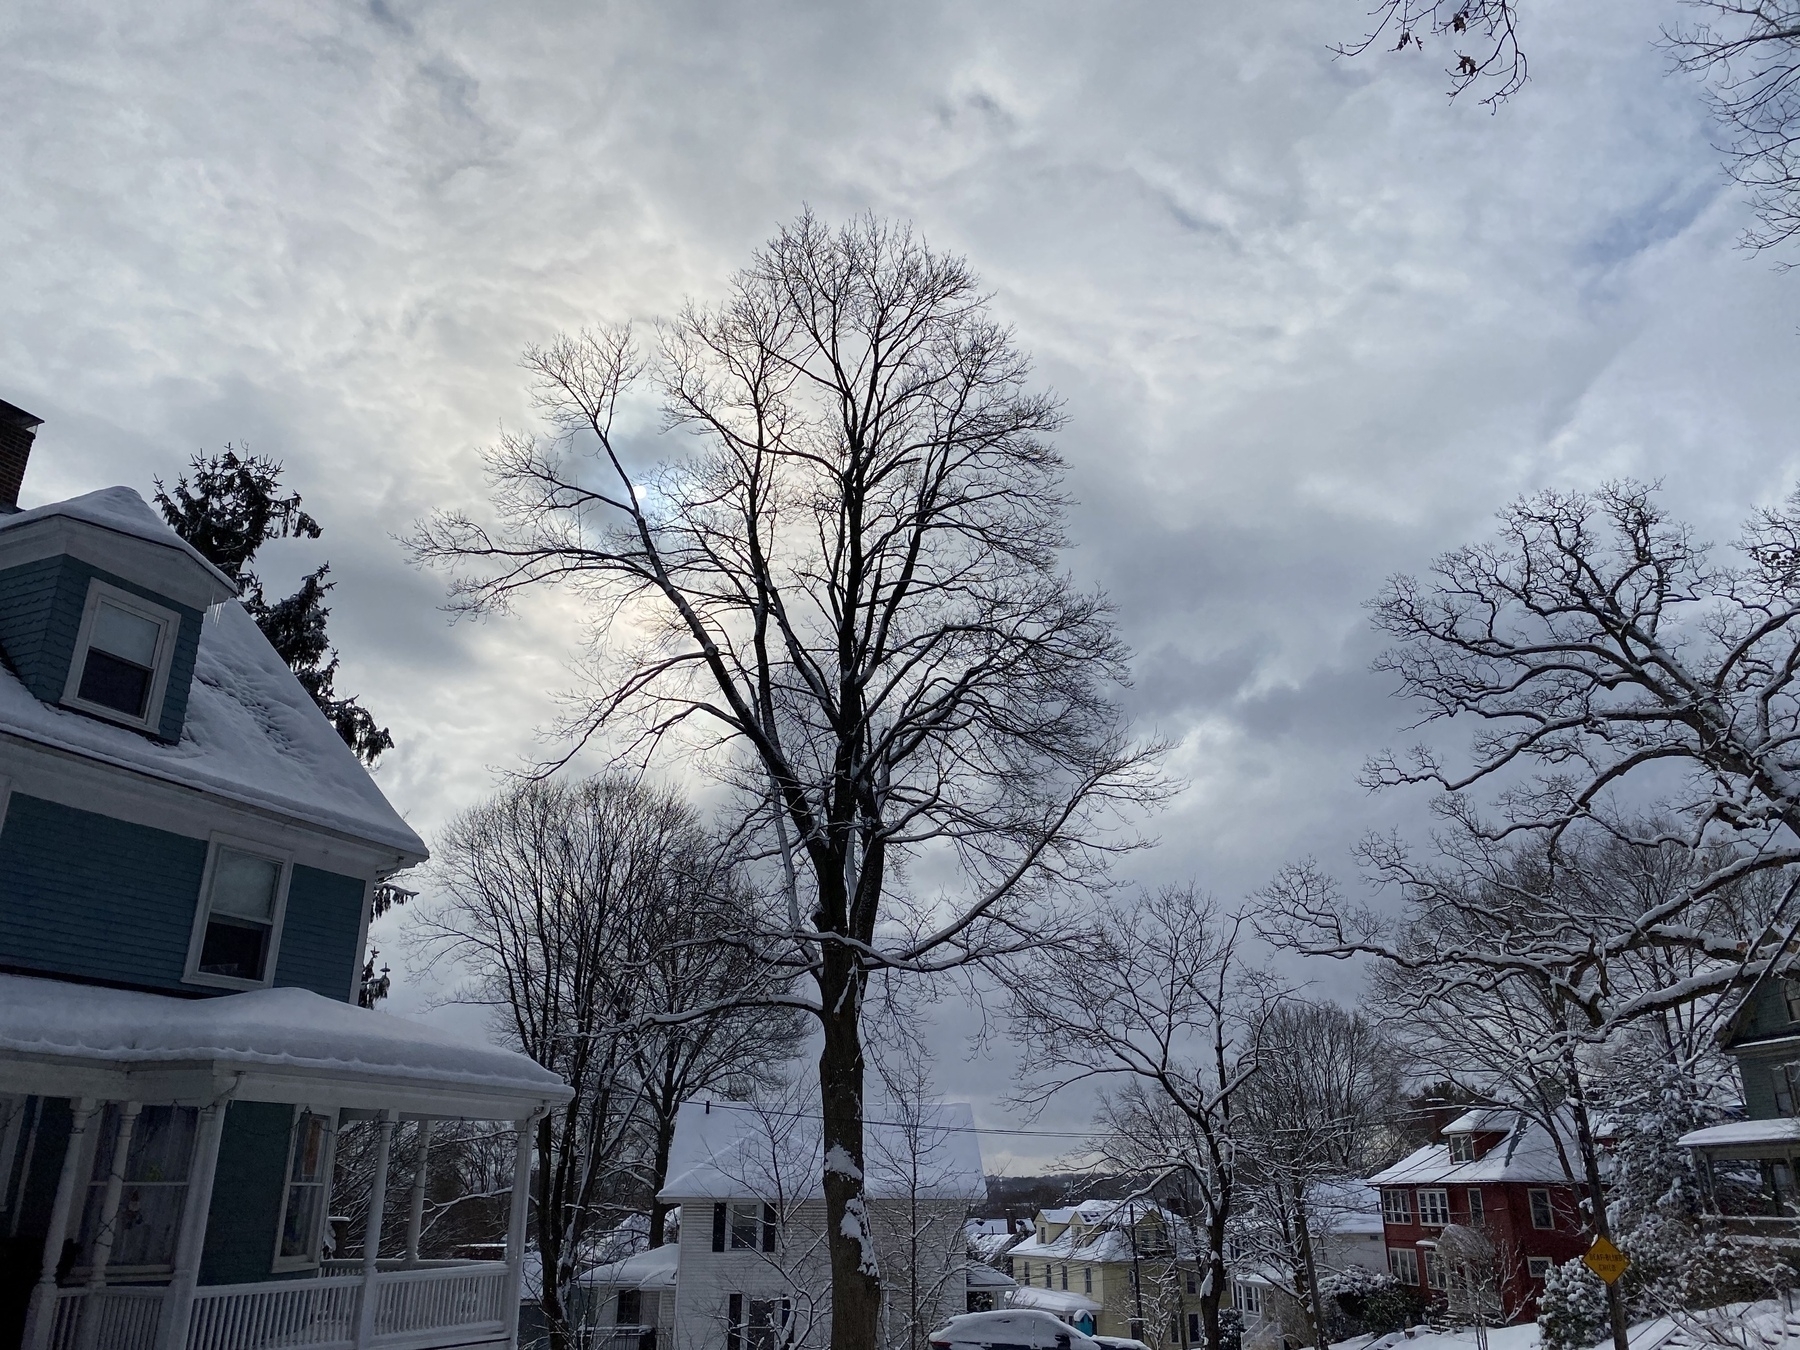 Late afternoon view of a bare branched tree against thin clouds with the sun behind the clouds and snow covering the roofs of the surrounding houses.